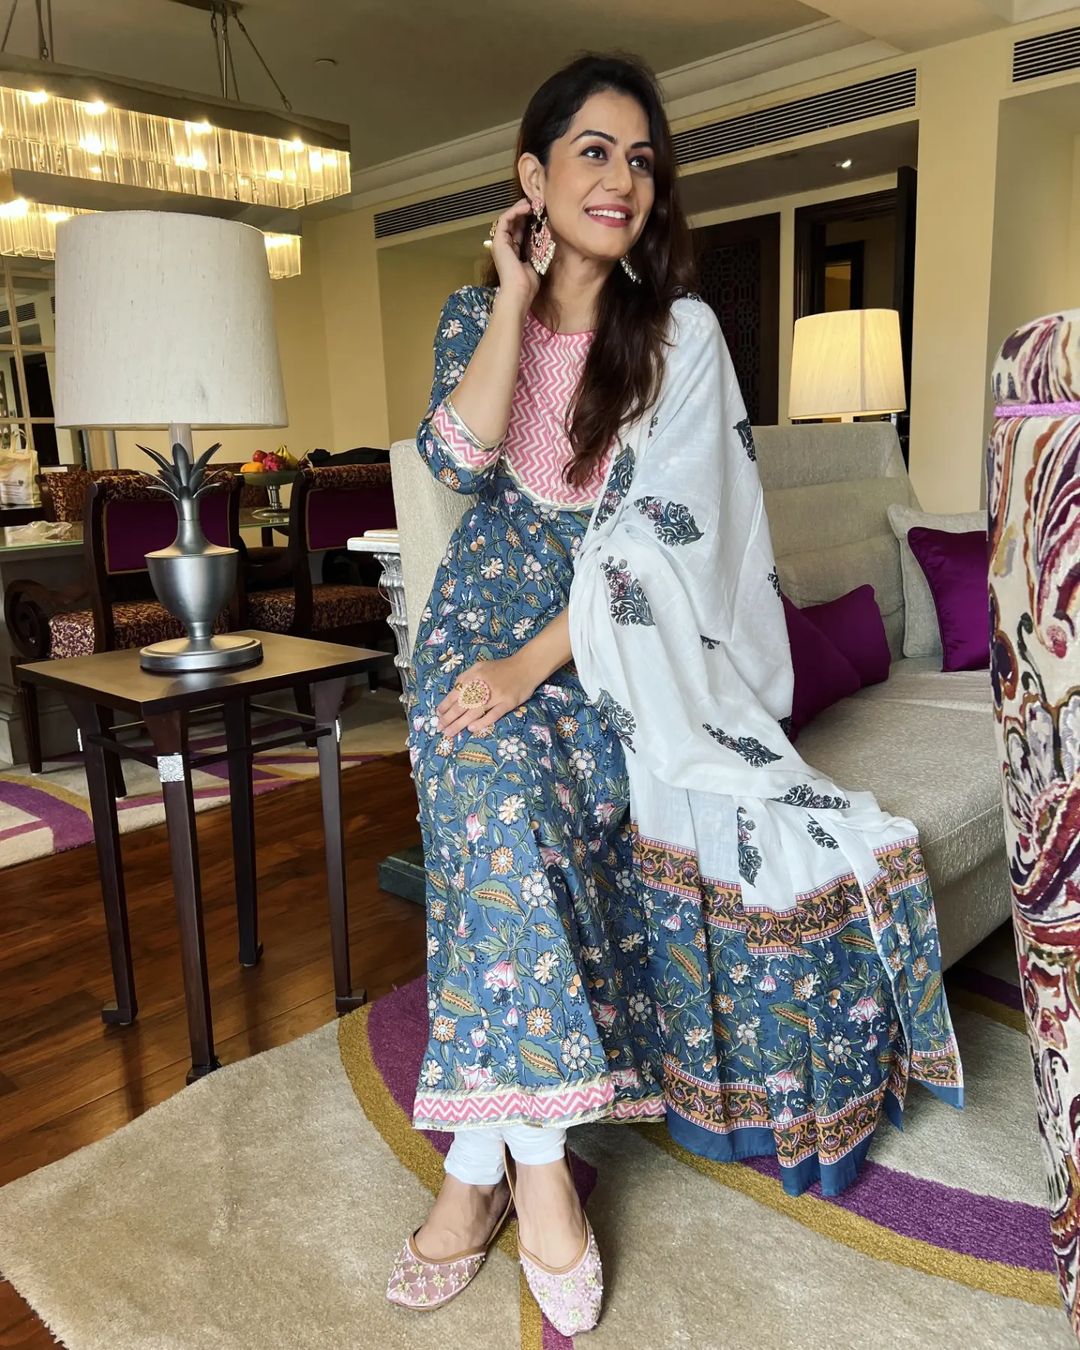 Ridhima ma'am in high style at the ITC Maratha hotel in July 2022